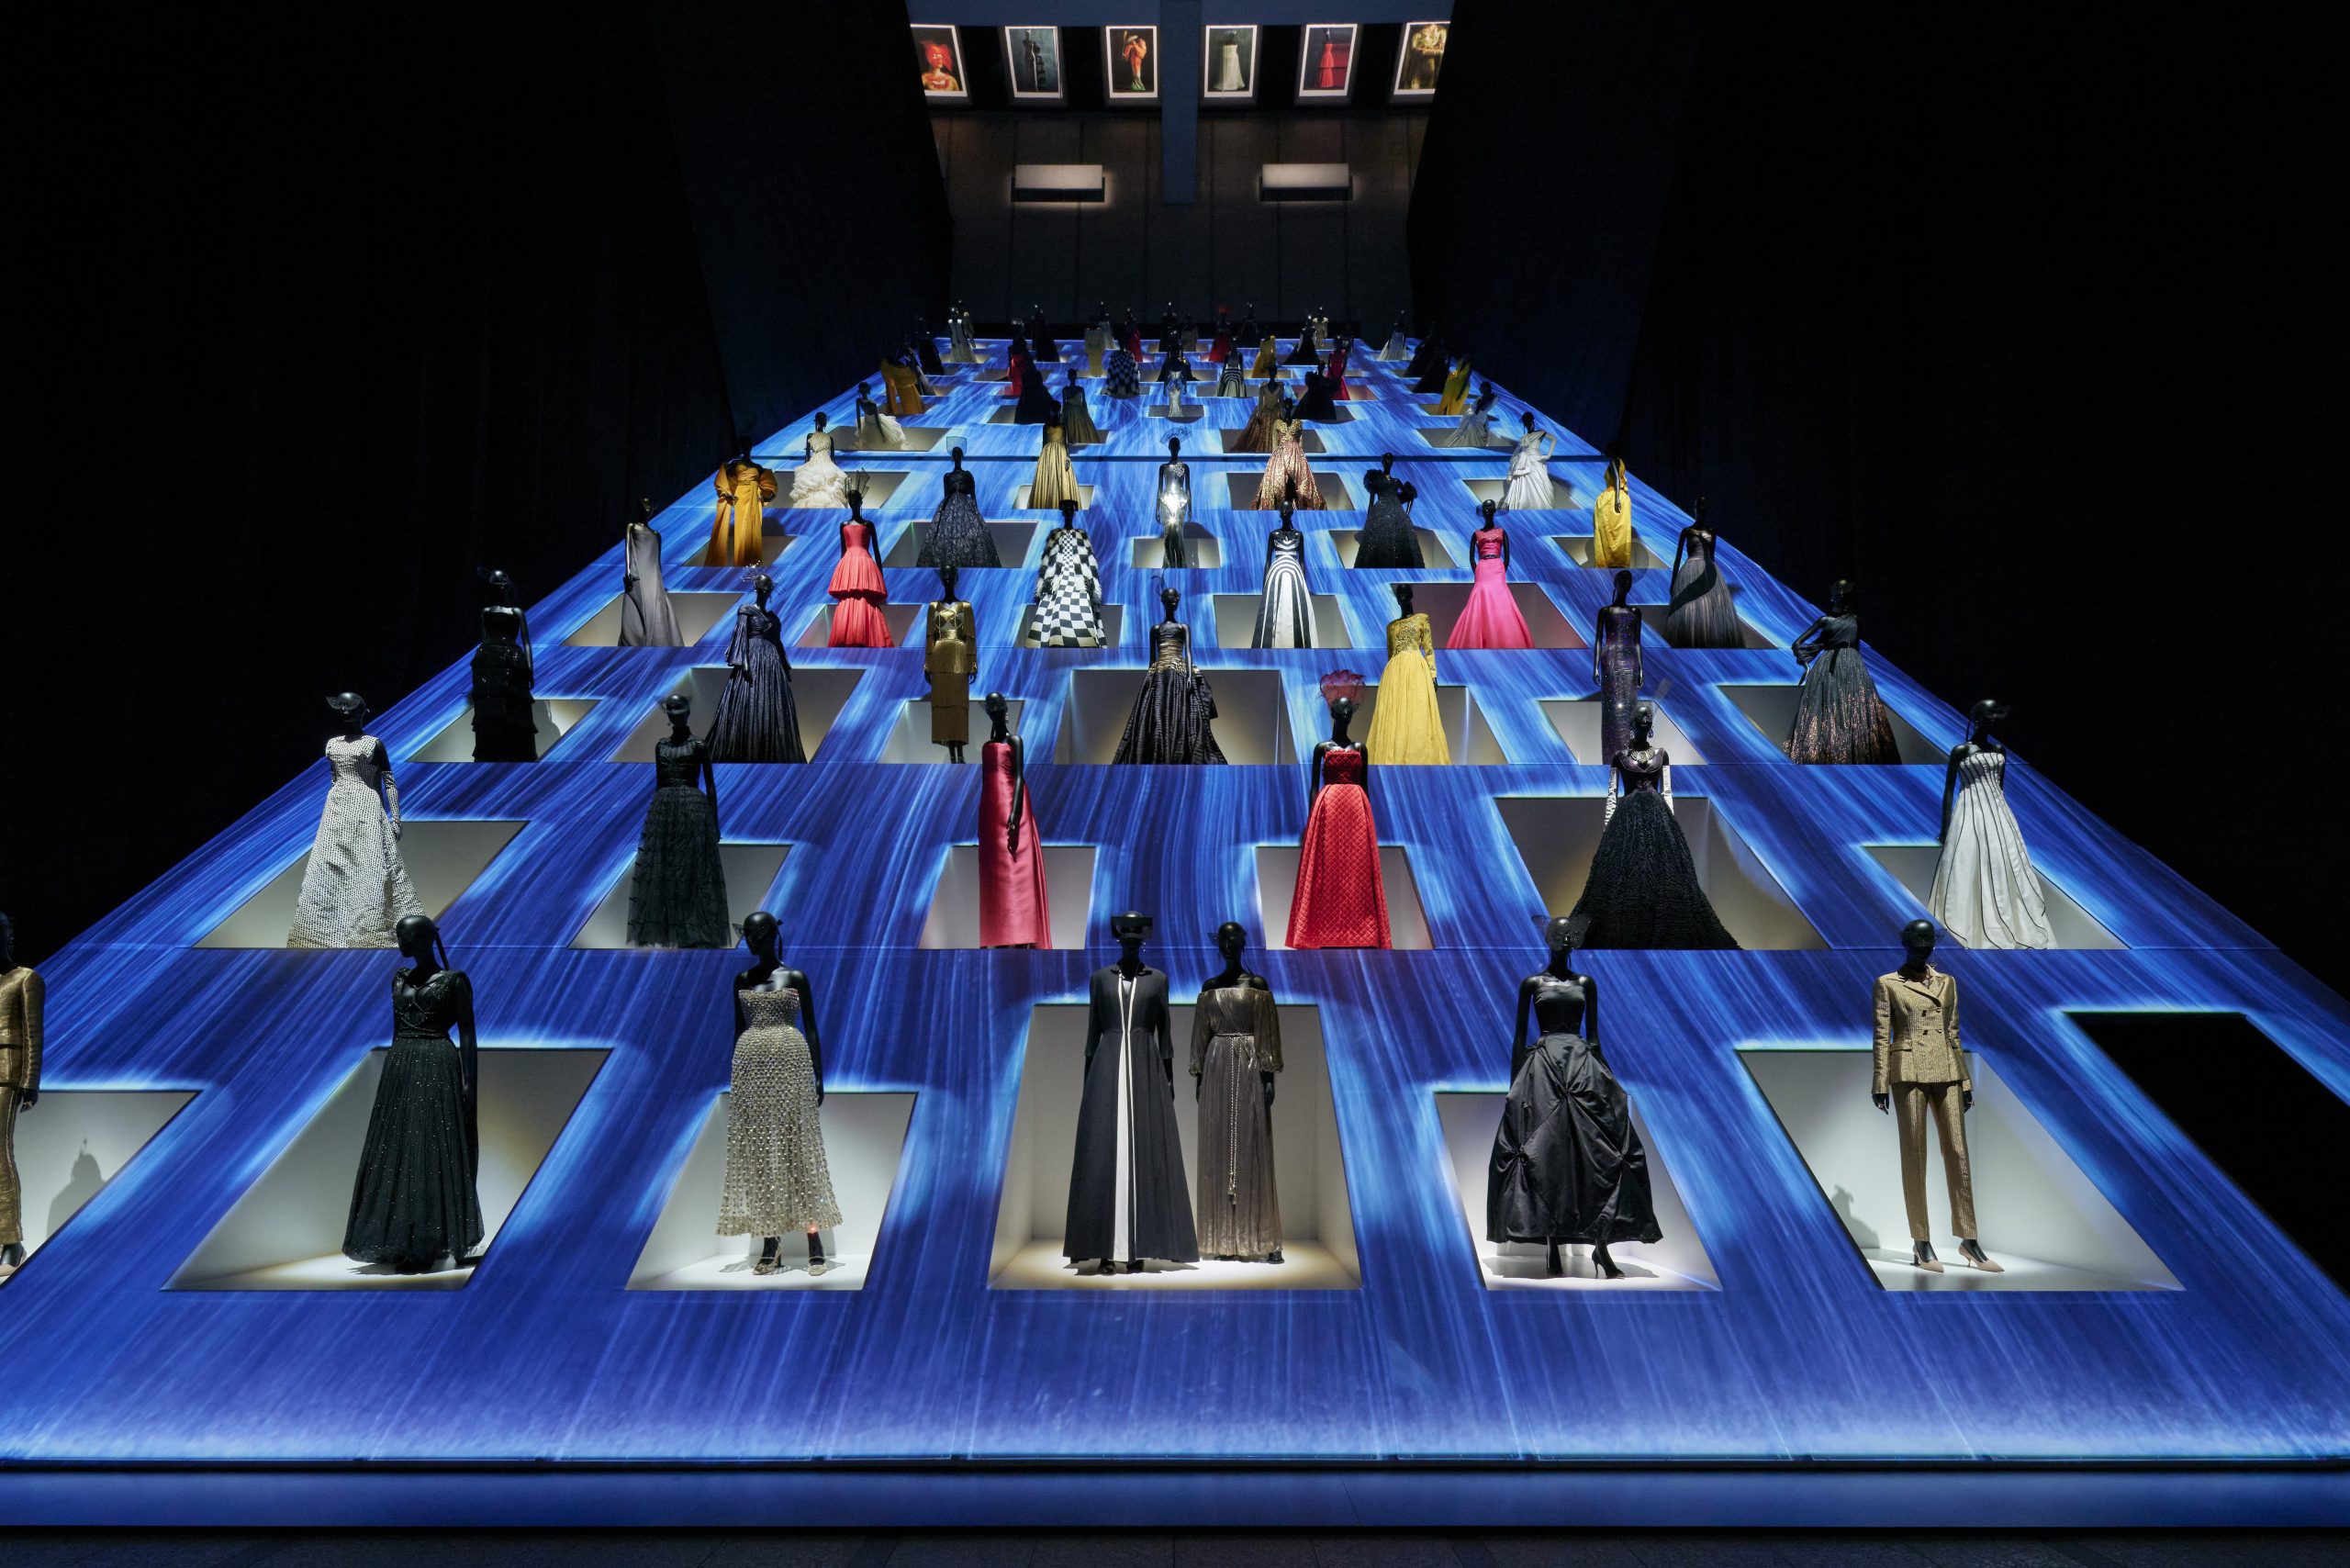 The 'Christian Dior Designer of Dreams' exhibition arrives in Tokyo